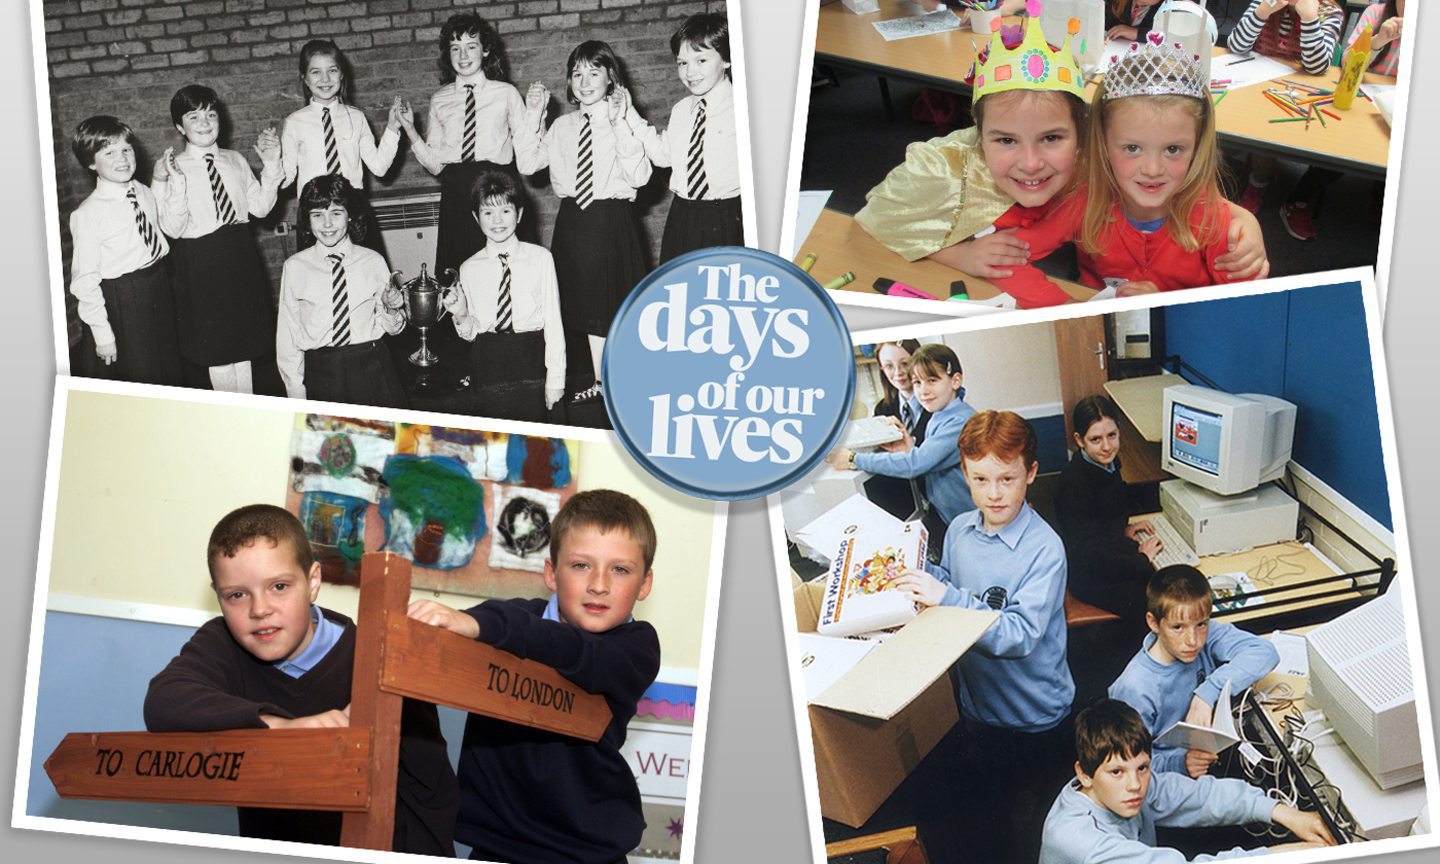 The days of our lives: Are you in these old school photos from Carlogie Primary School?